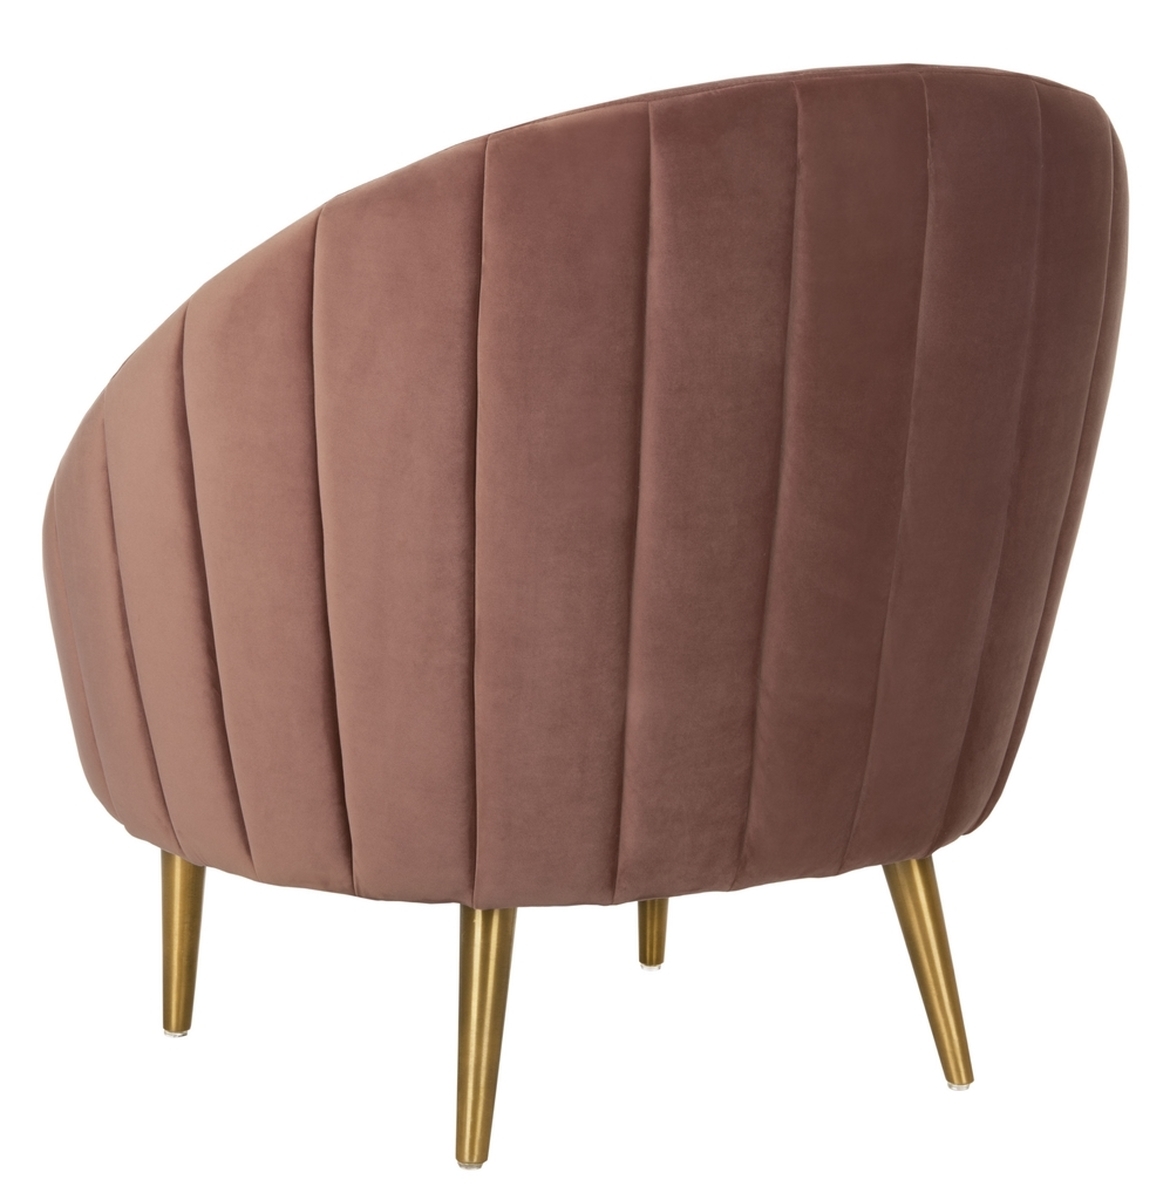 Razia Channel Tufted Tub Chair - Dusty Rose - Arlo Home - Image 4